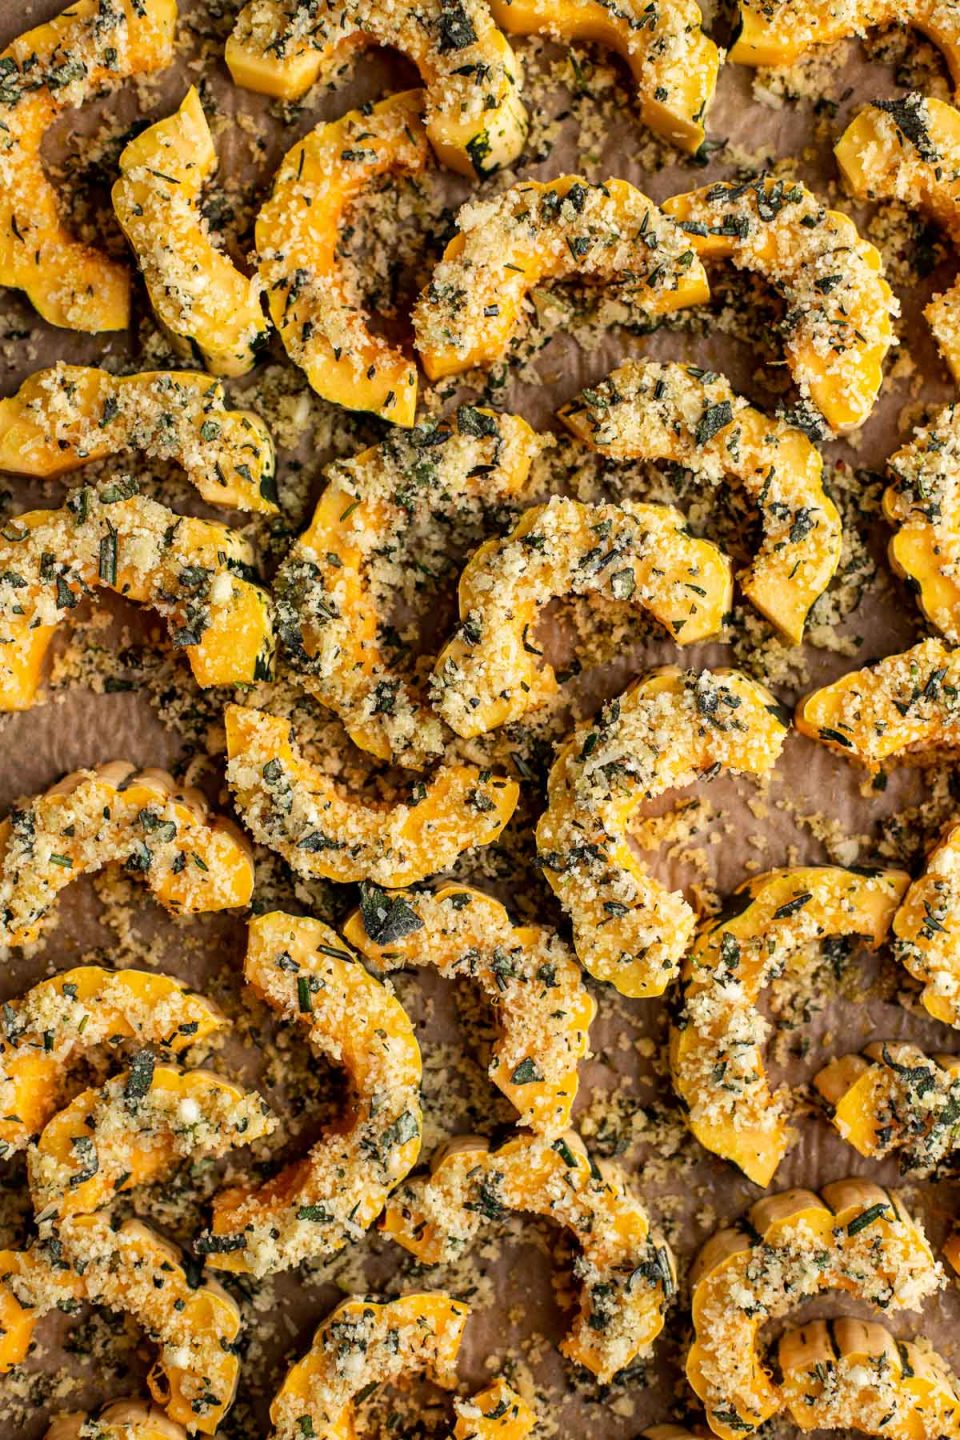 Slices of Delicata Squash seasoned with parmesan cheese, panko breadcrumbs, and fresh herbs are arranged on a piece of brown parchment paper for roasting.